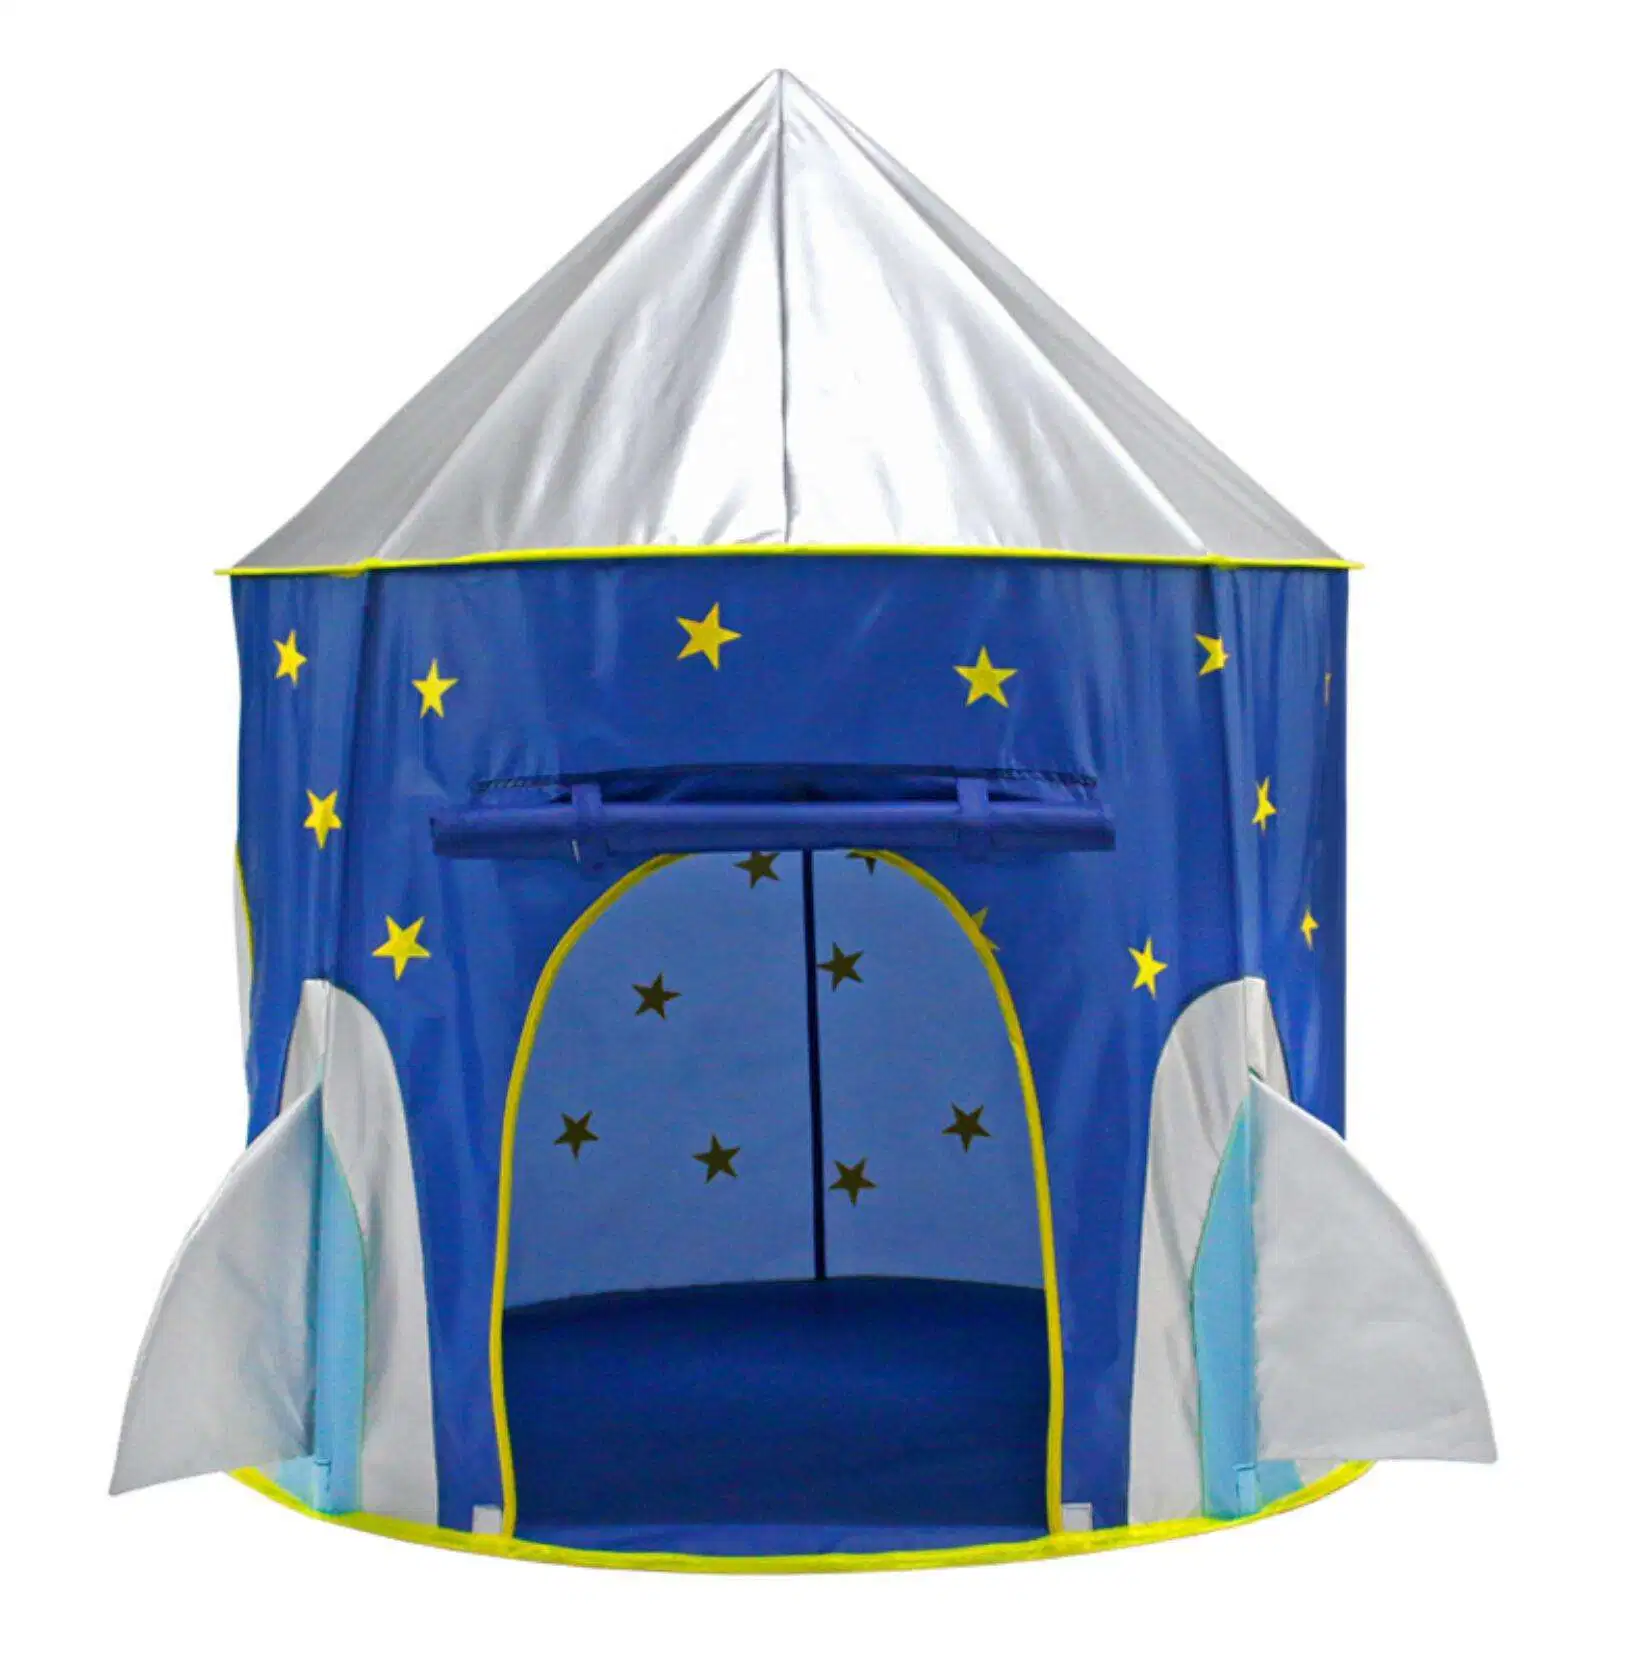 Pop up Custom Kids Play Tent Castle Tent Yurt Play Tent Made by 190 T Polyester and Fiber Glass Pole Great Gift Toy for Chidred